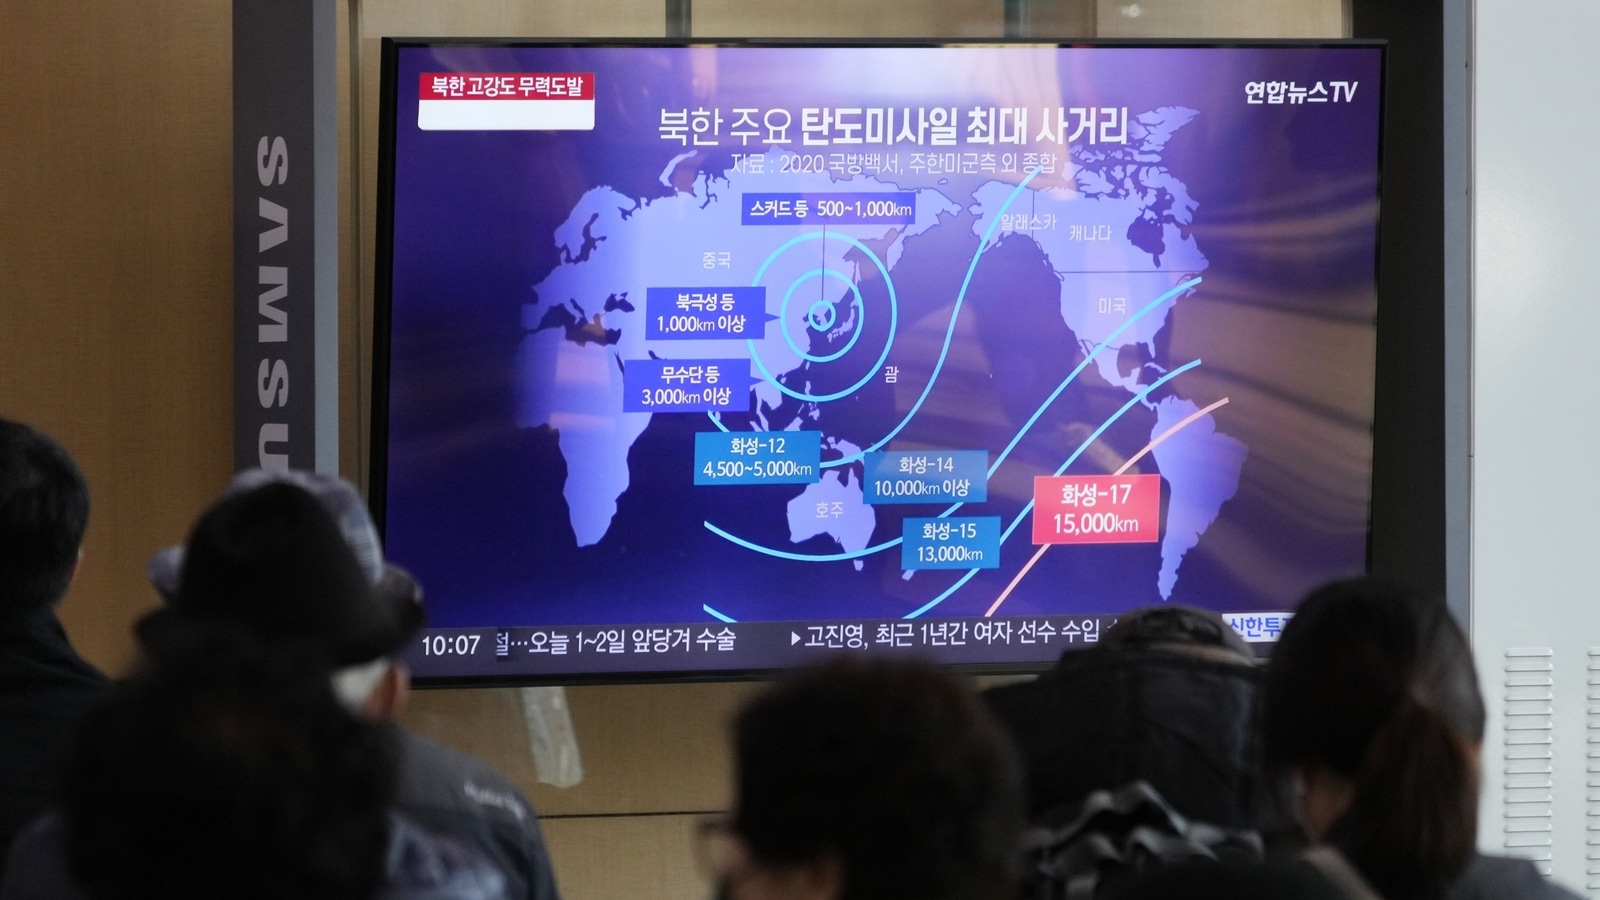 us-allies-clash-with-russia-china-over-escalating-tensions-in-korean-peninsula